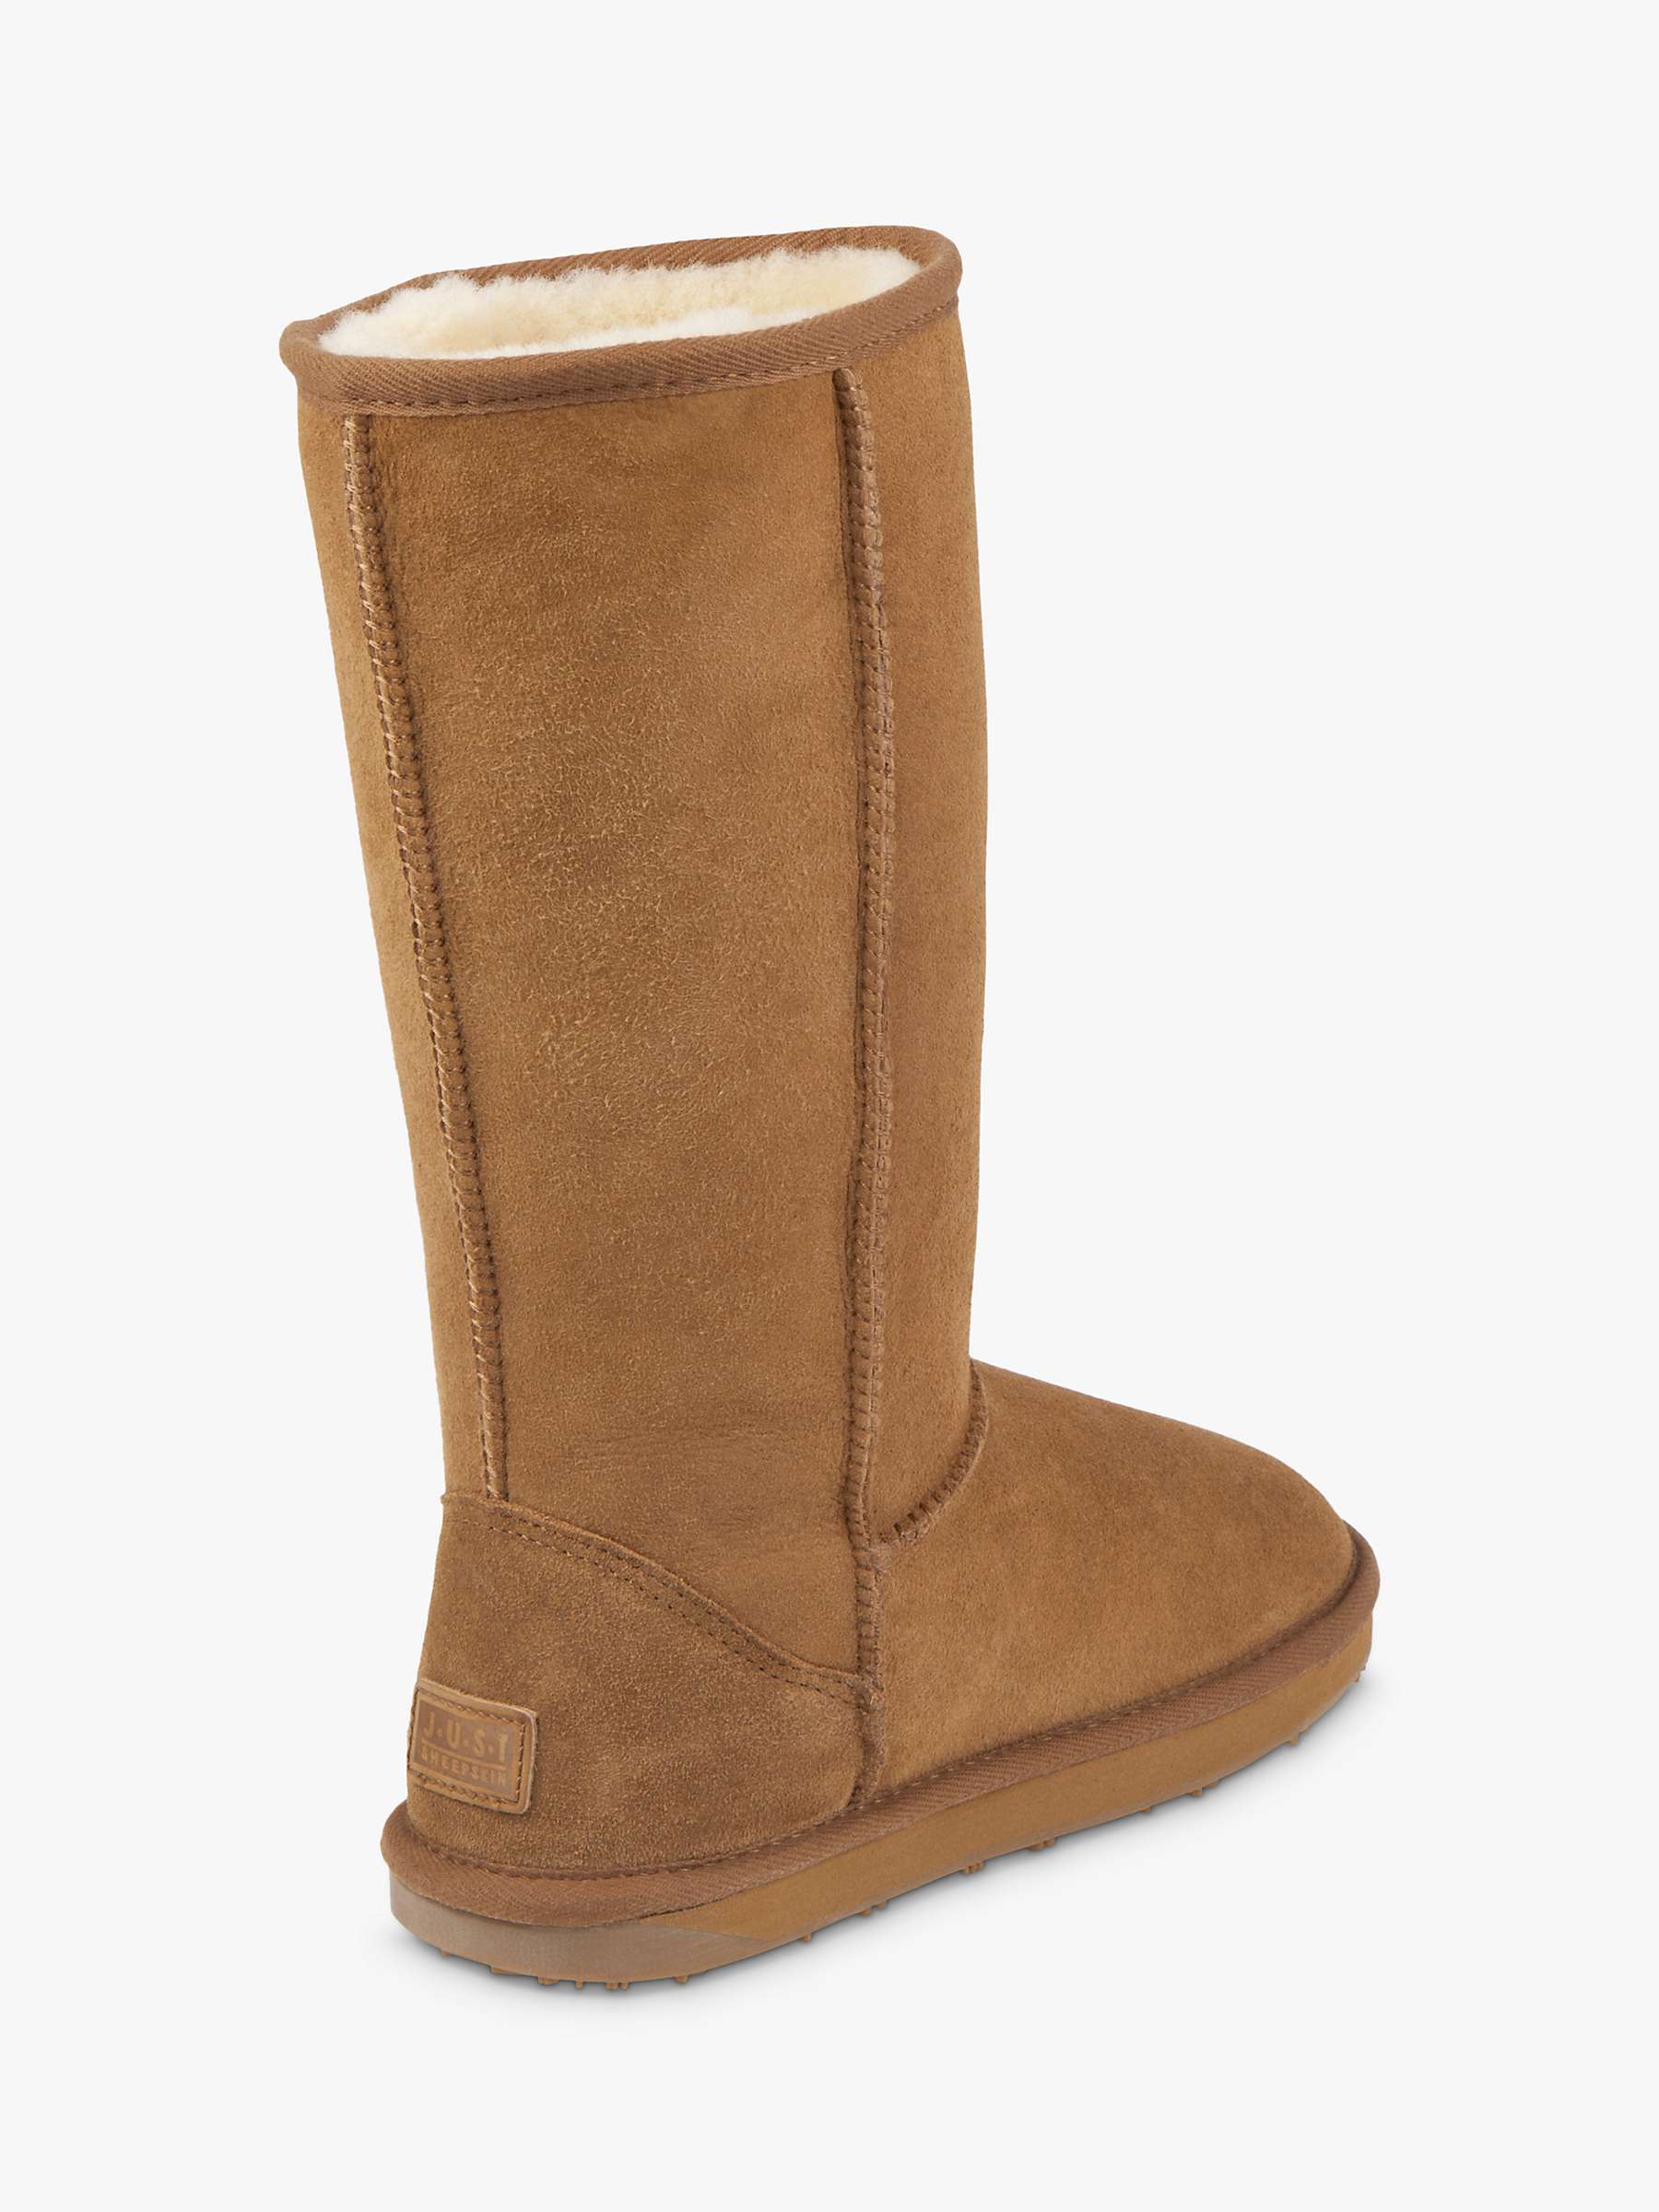 Buy Just Sheepskin Tall Classic Boots, Chestnut Online at johnlewis.com